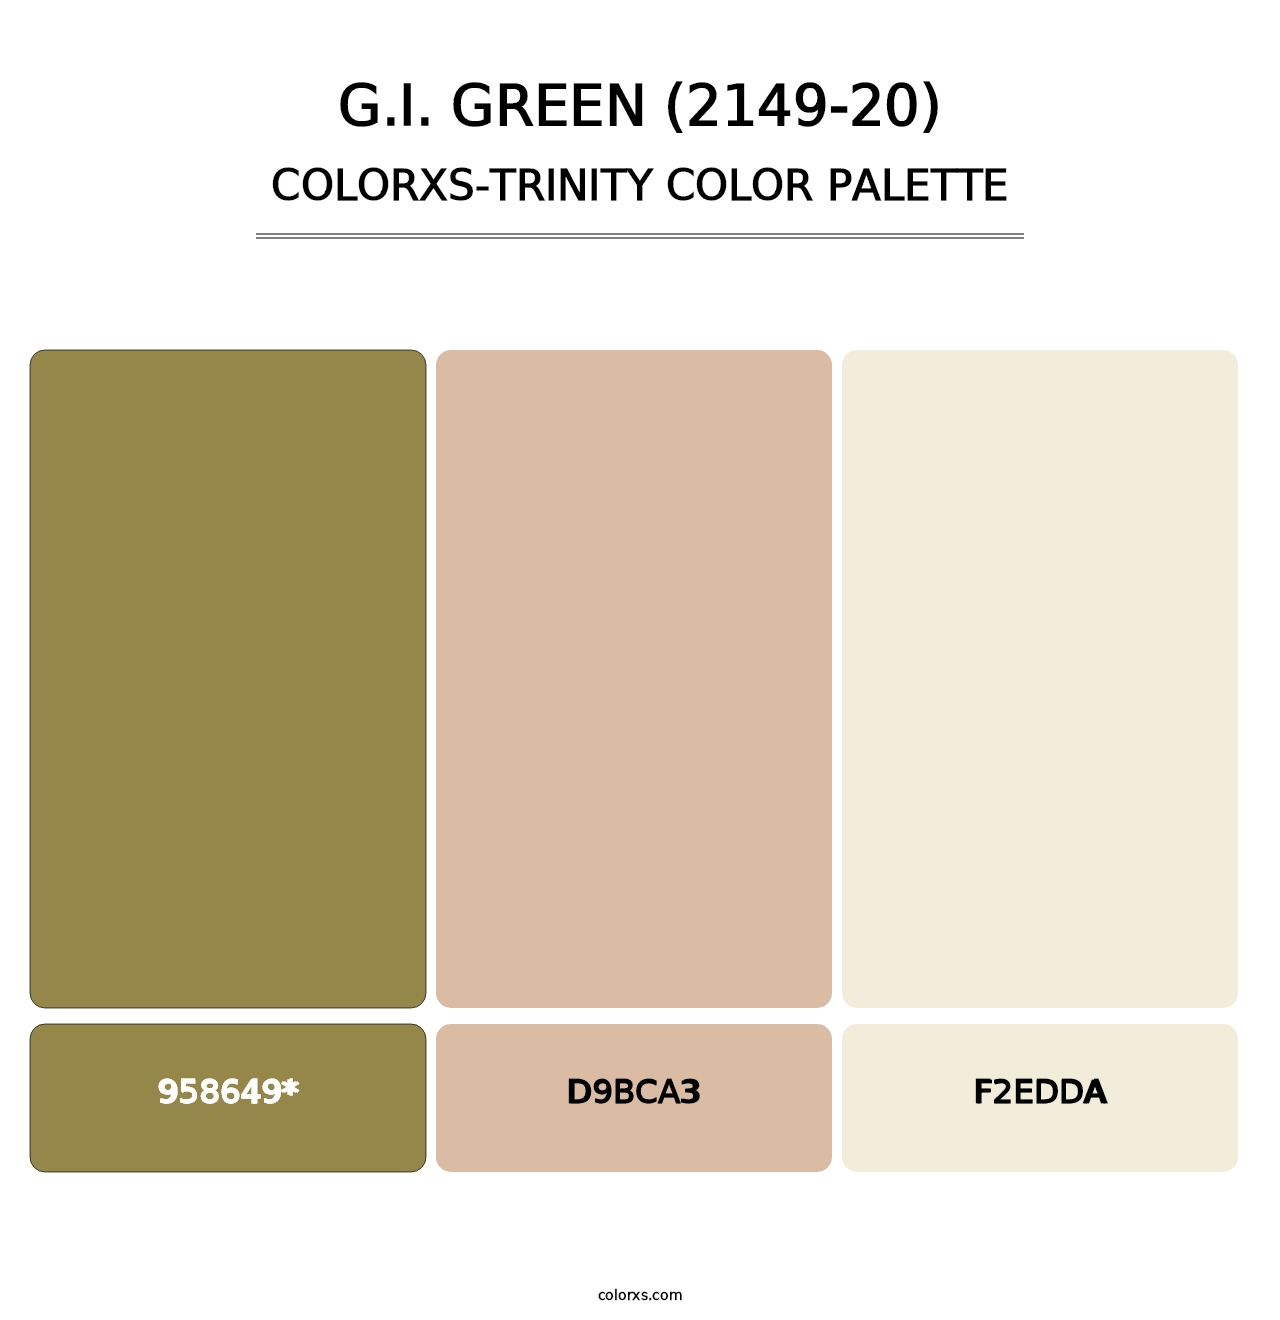 G.I. Green (2149-20) - Colorxs Trinity Palette